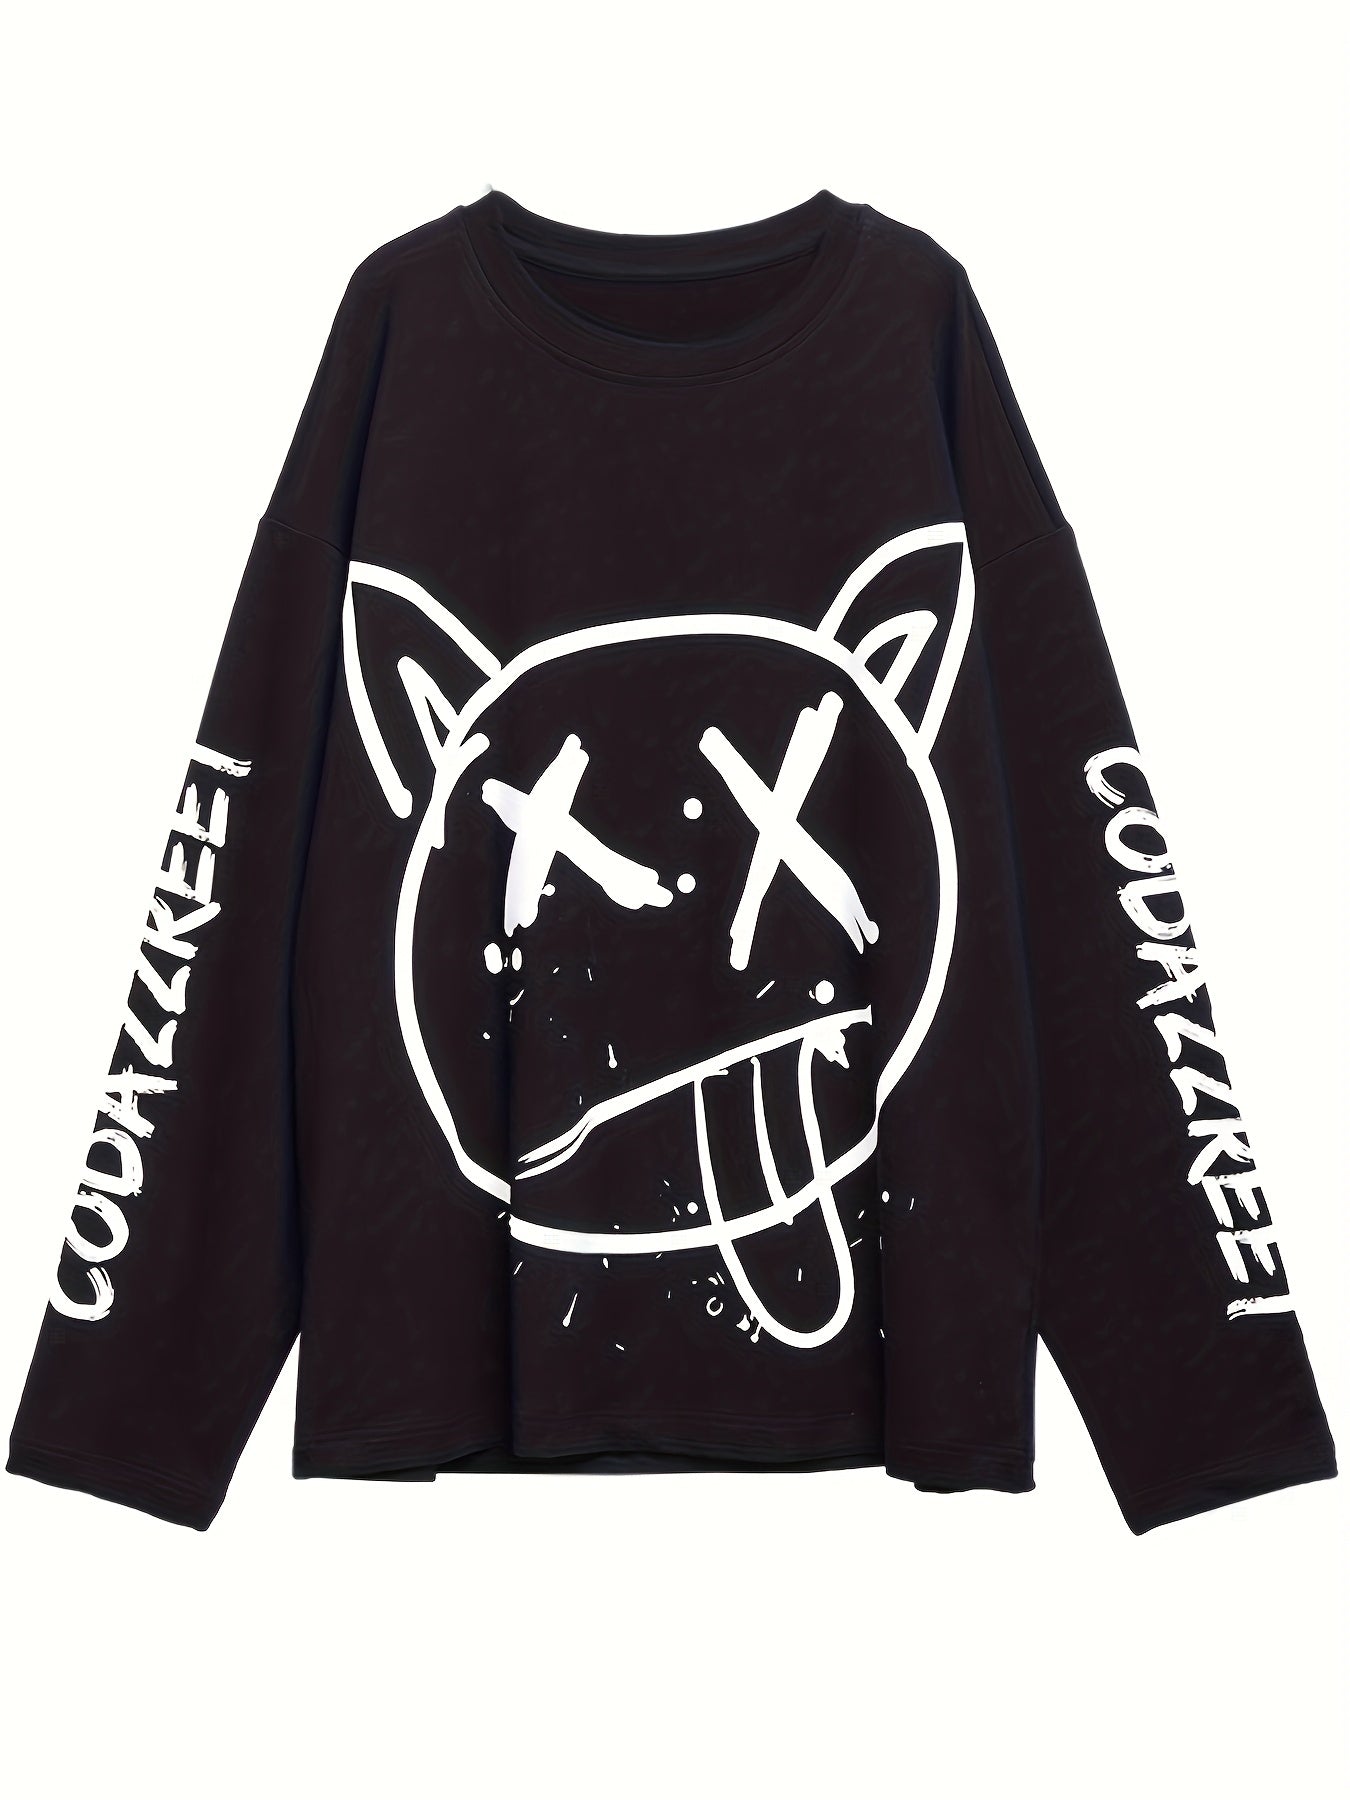 A black Graffiti Print Crew Neck T-Shirt, Casual Loose Long Sleeve Top For Spring & Fall, Women's Clothing by Maramalive™ featuring a white graffiti print of a cat face with X eyes and tongue out. The word "CODAZKREEI" is printed on both sleeves, giving it a distinctive Y2K style.